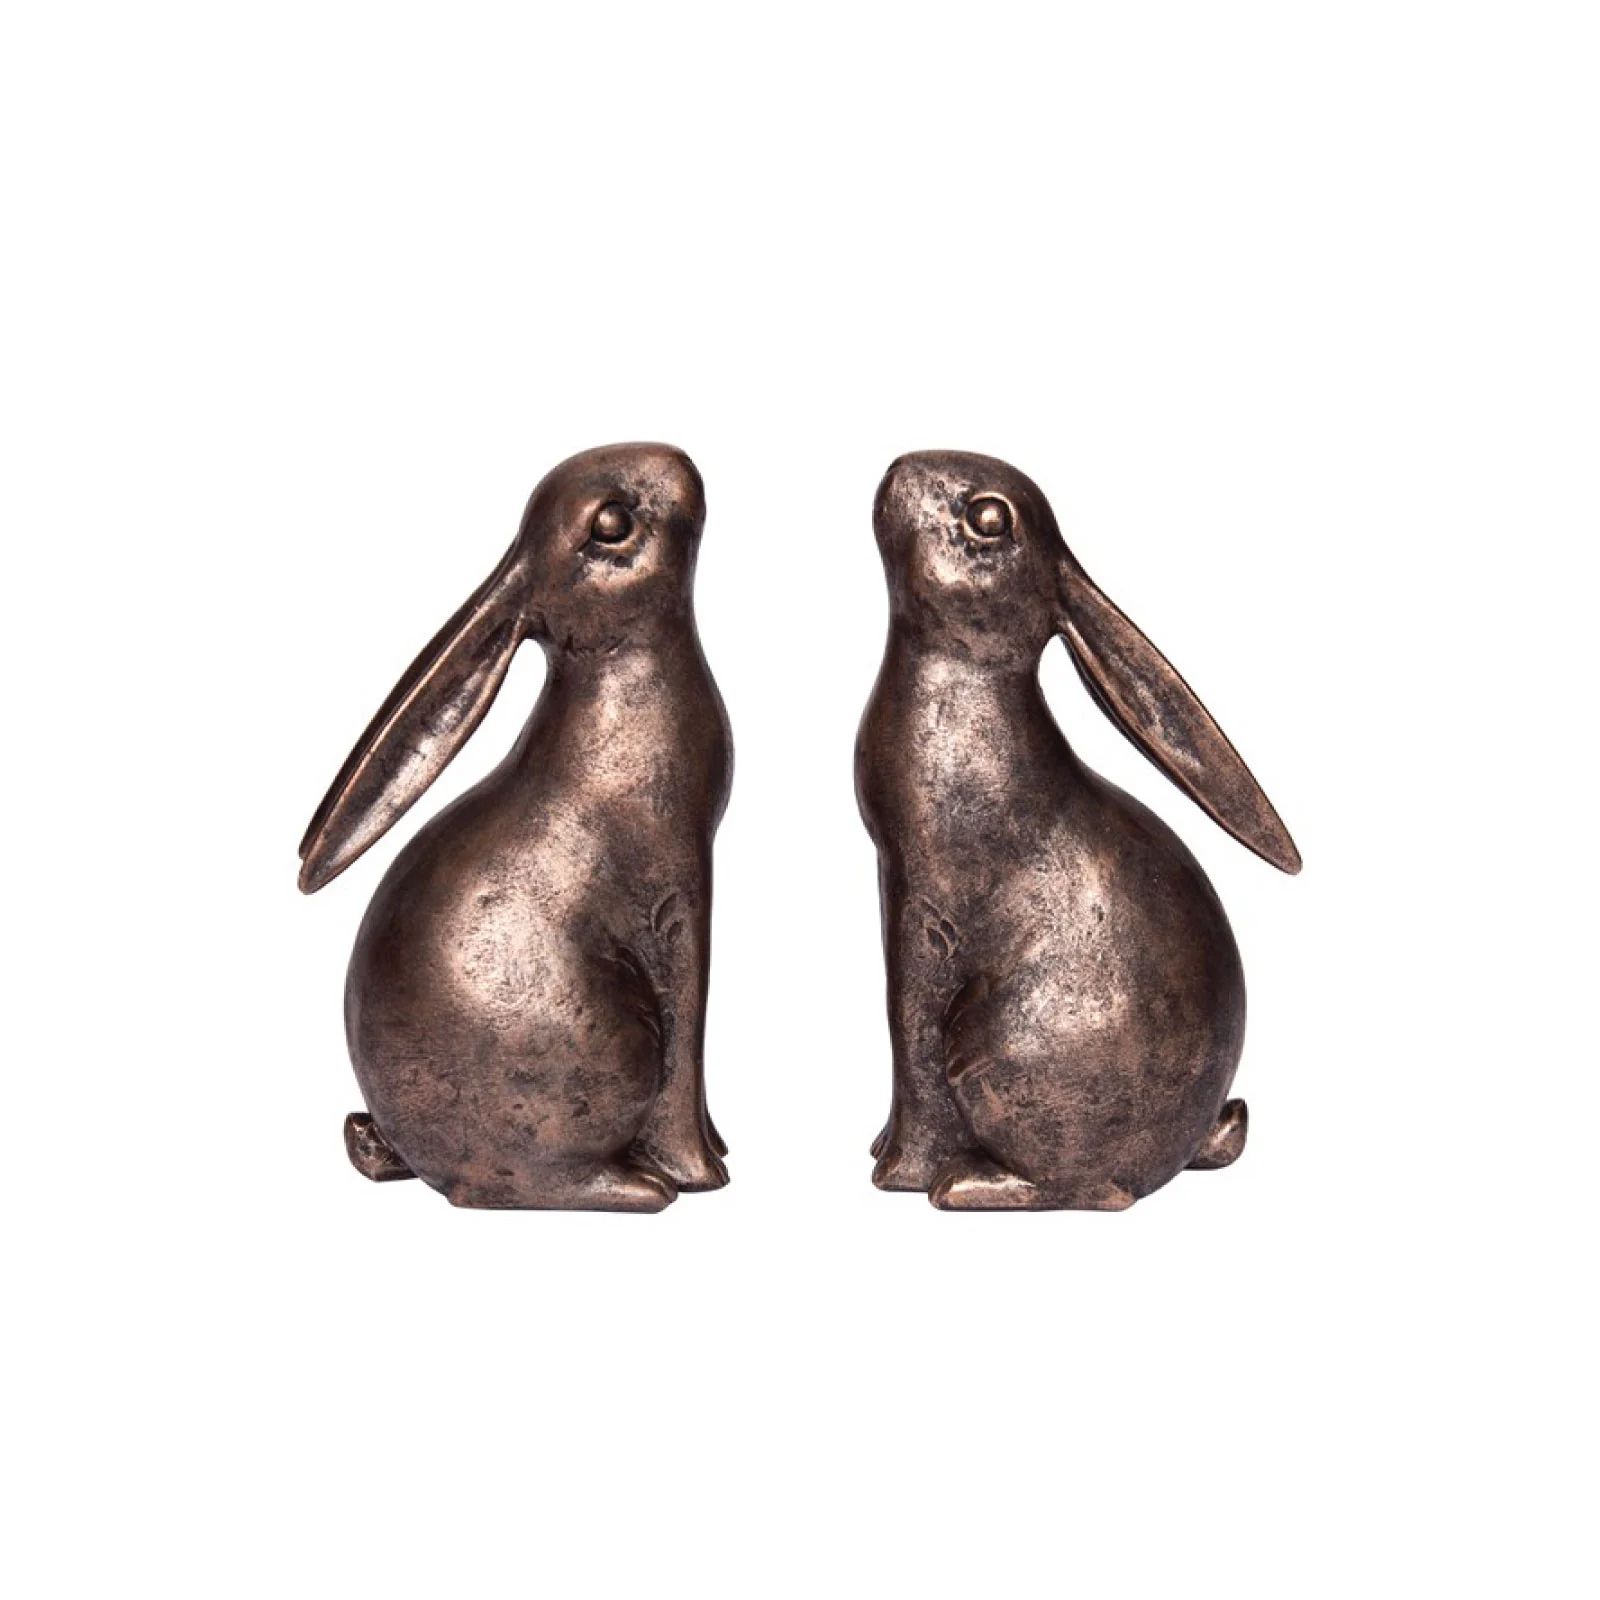 Bunny Book Ends | Brooke and Lou